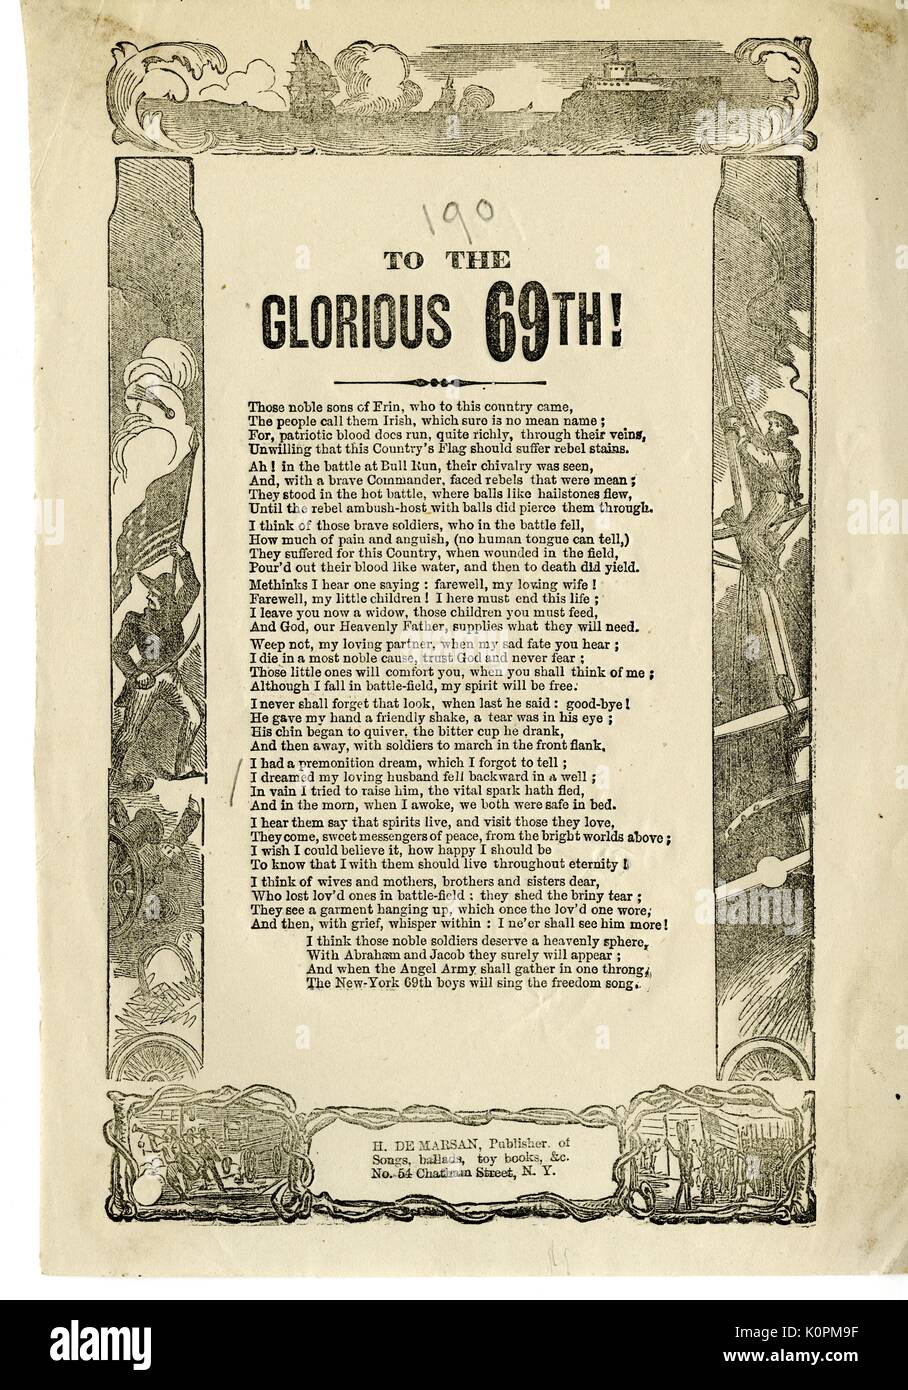 Broadside from the American Civil War entitled 'To the Glorious 69th!, ' glorifying the fallen soldiers of the 69th Regiment, also known as the Irish Brigade, New York, New York, 1863. Stock Photo